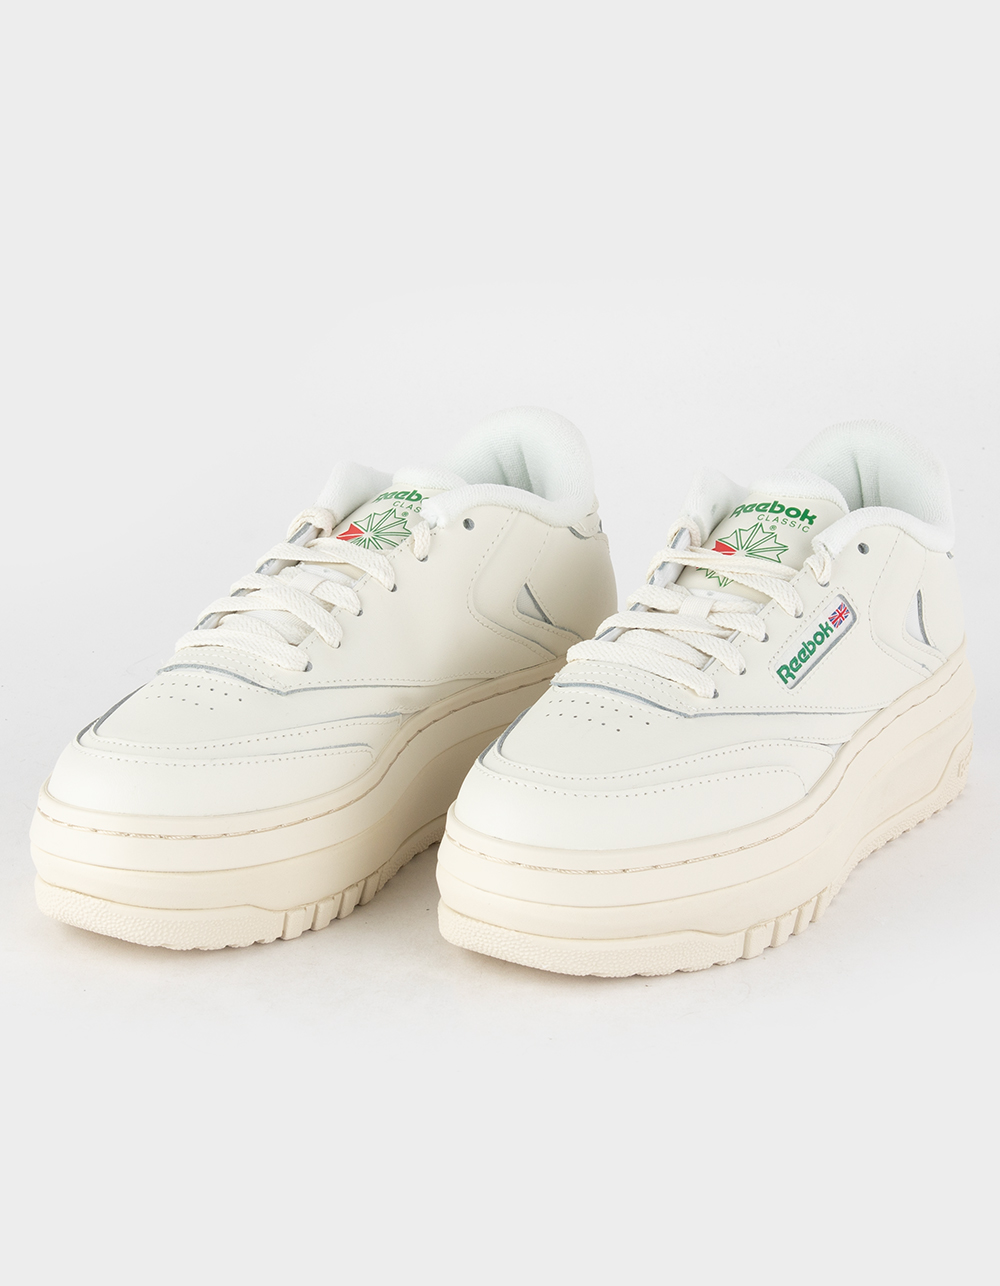 at straffe liv kobling REEBOK Club C Extra Womens Shoes - OFF WHITE | Tillys